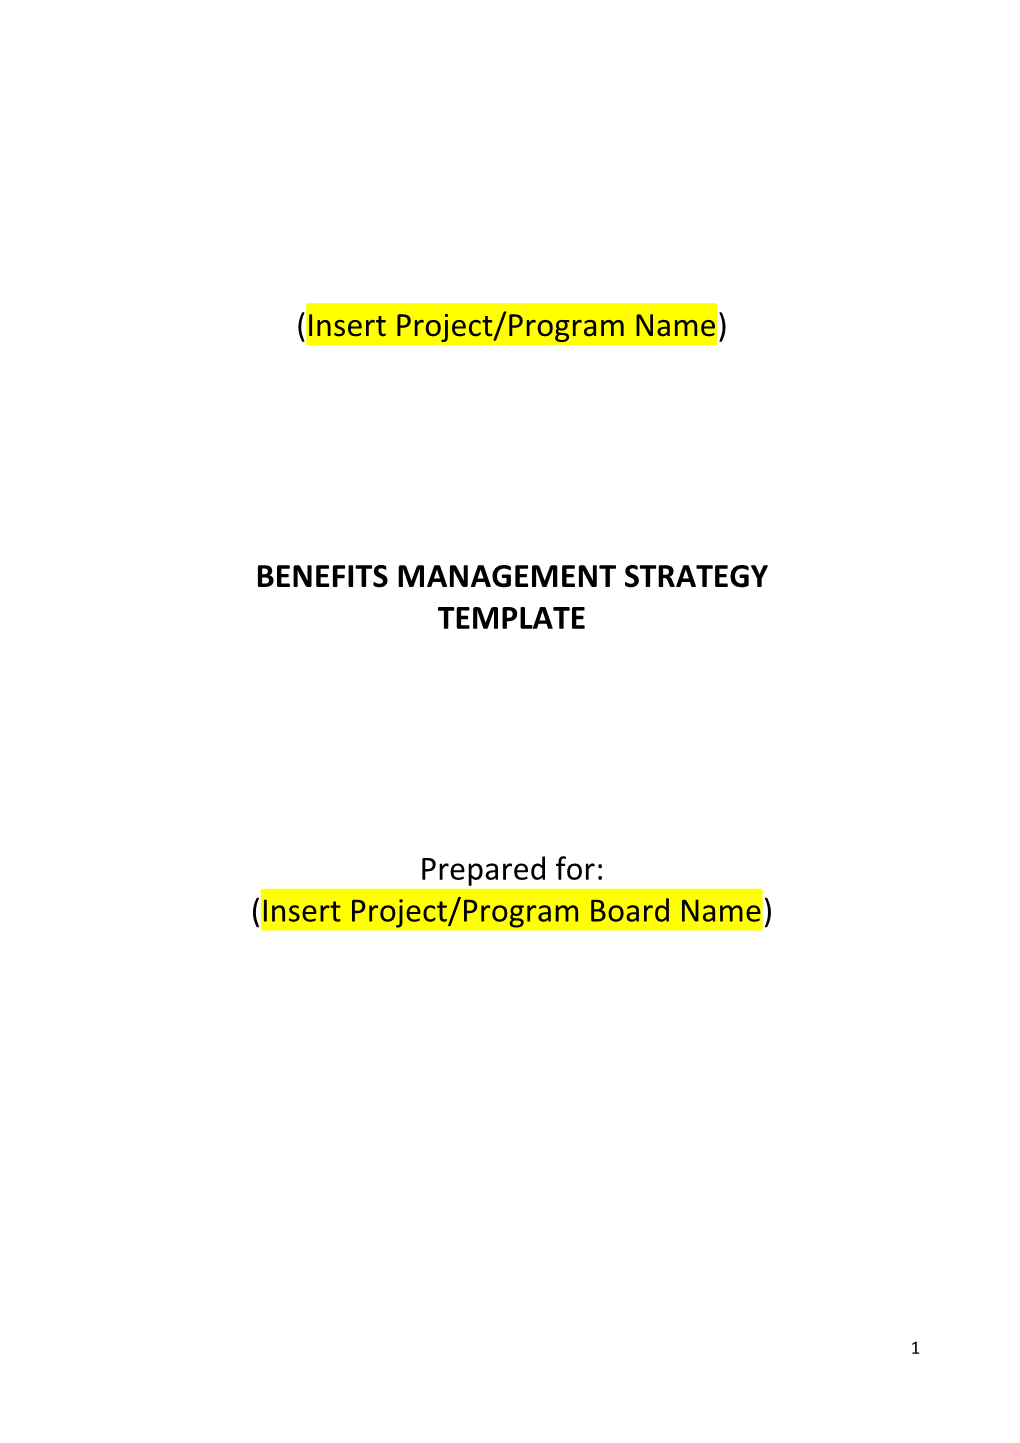 Benefits Management Strategy Template